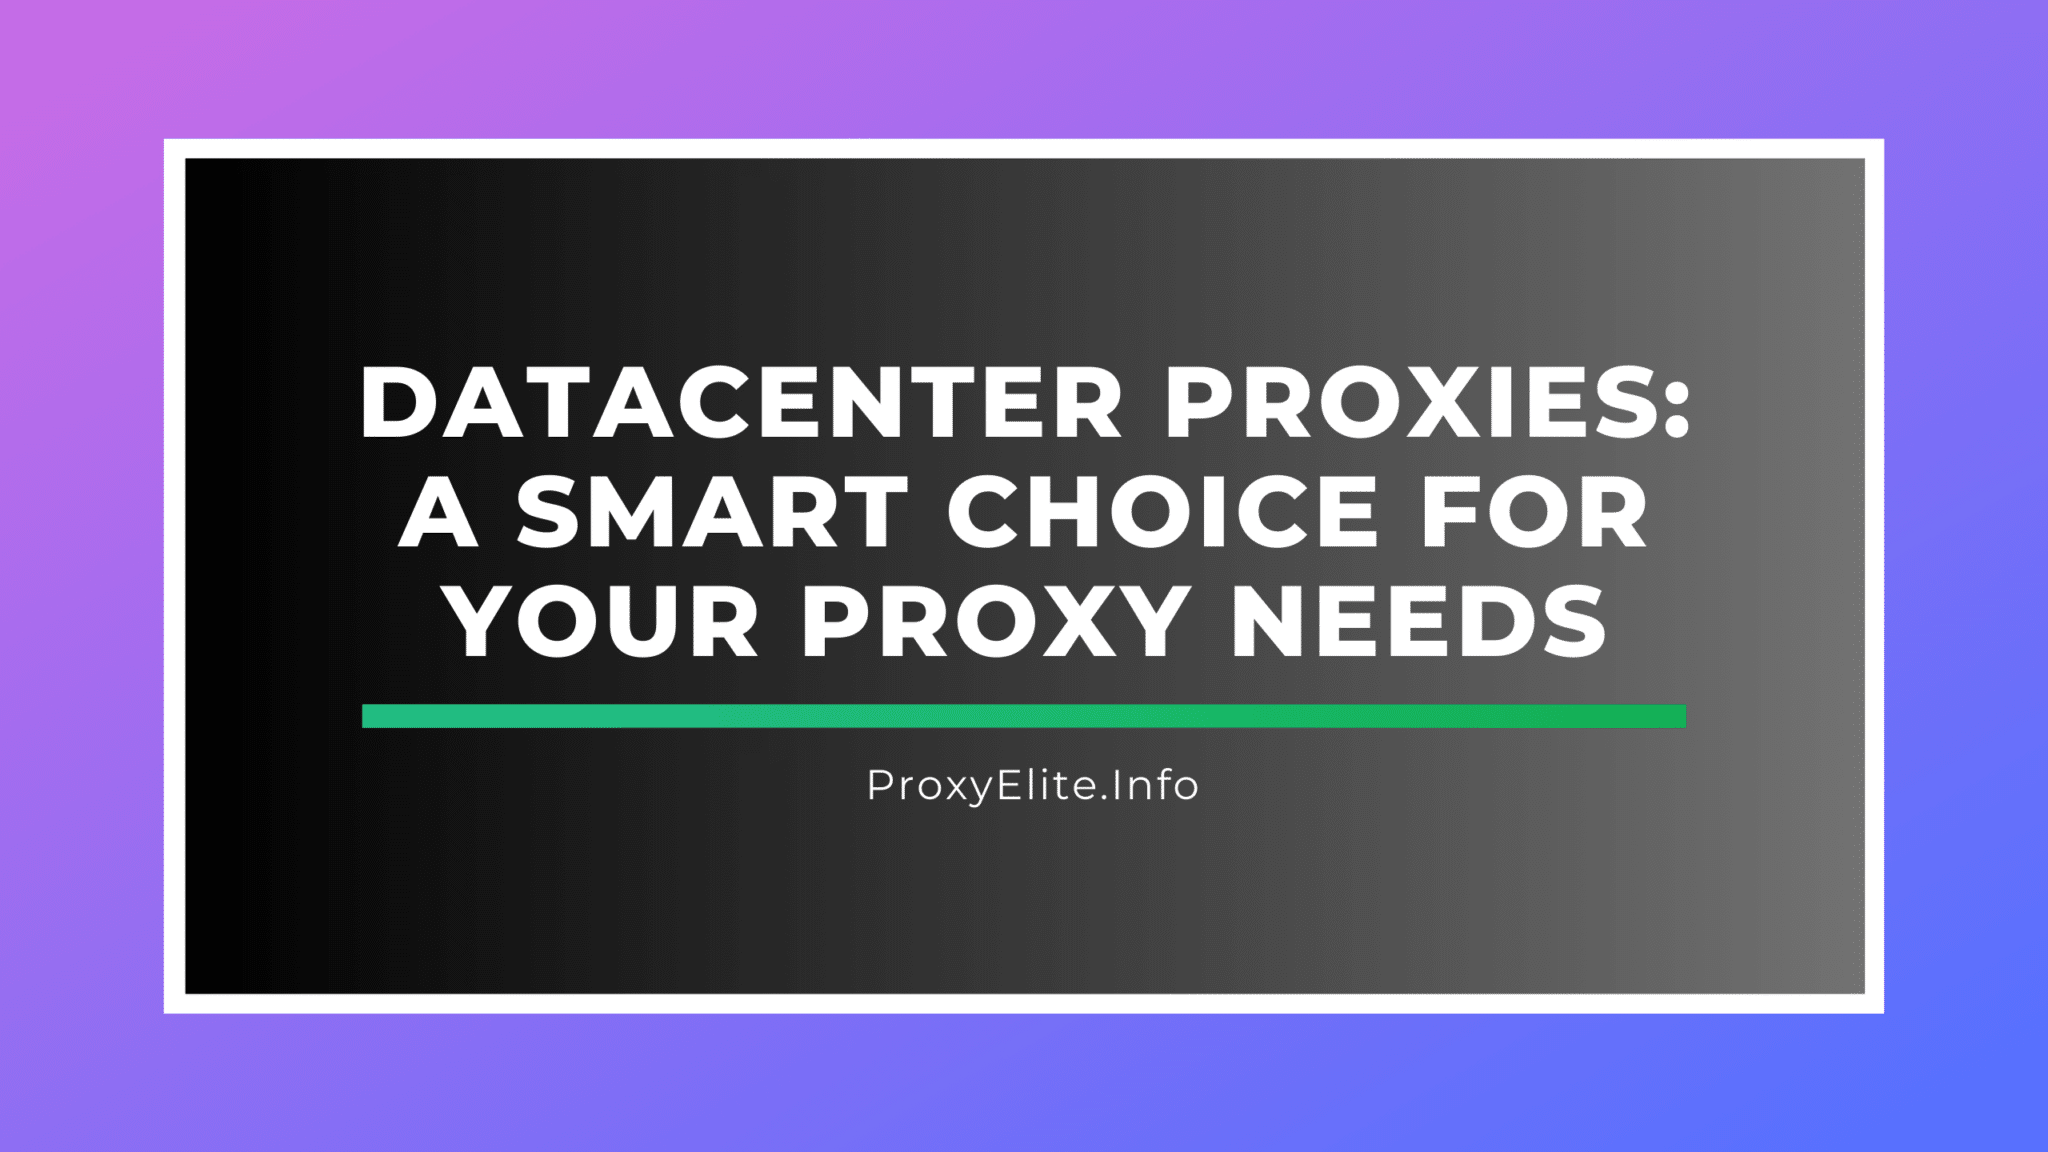 Datacenter Proxies: A Smart Choice for Your Proxy Needs